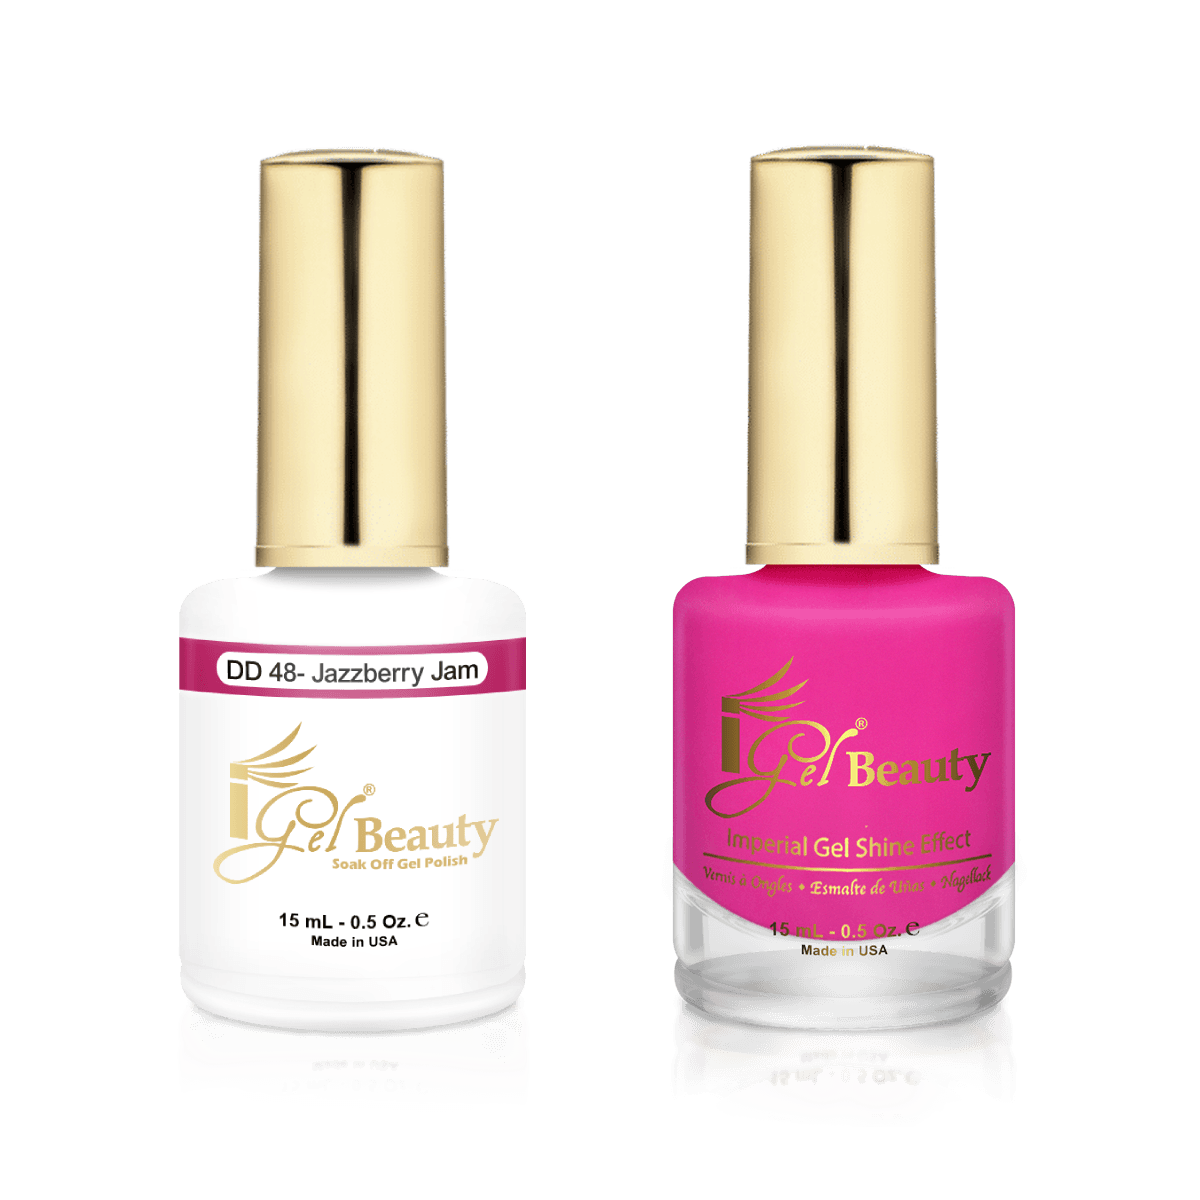 IGel Duo Gel Polish + Matching Nail Lacquer DD 48 JAZZBERRY JAM